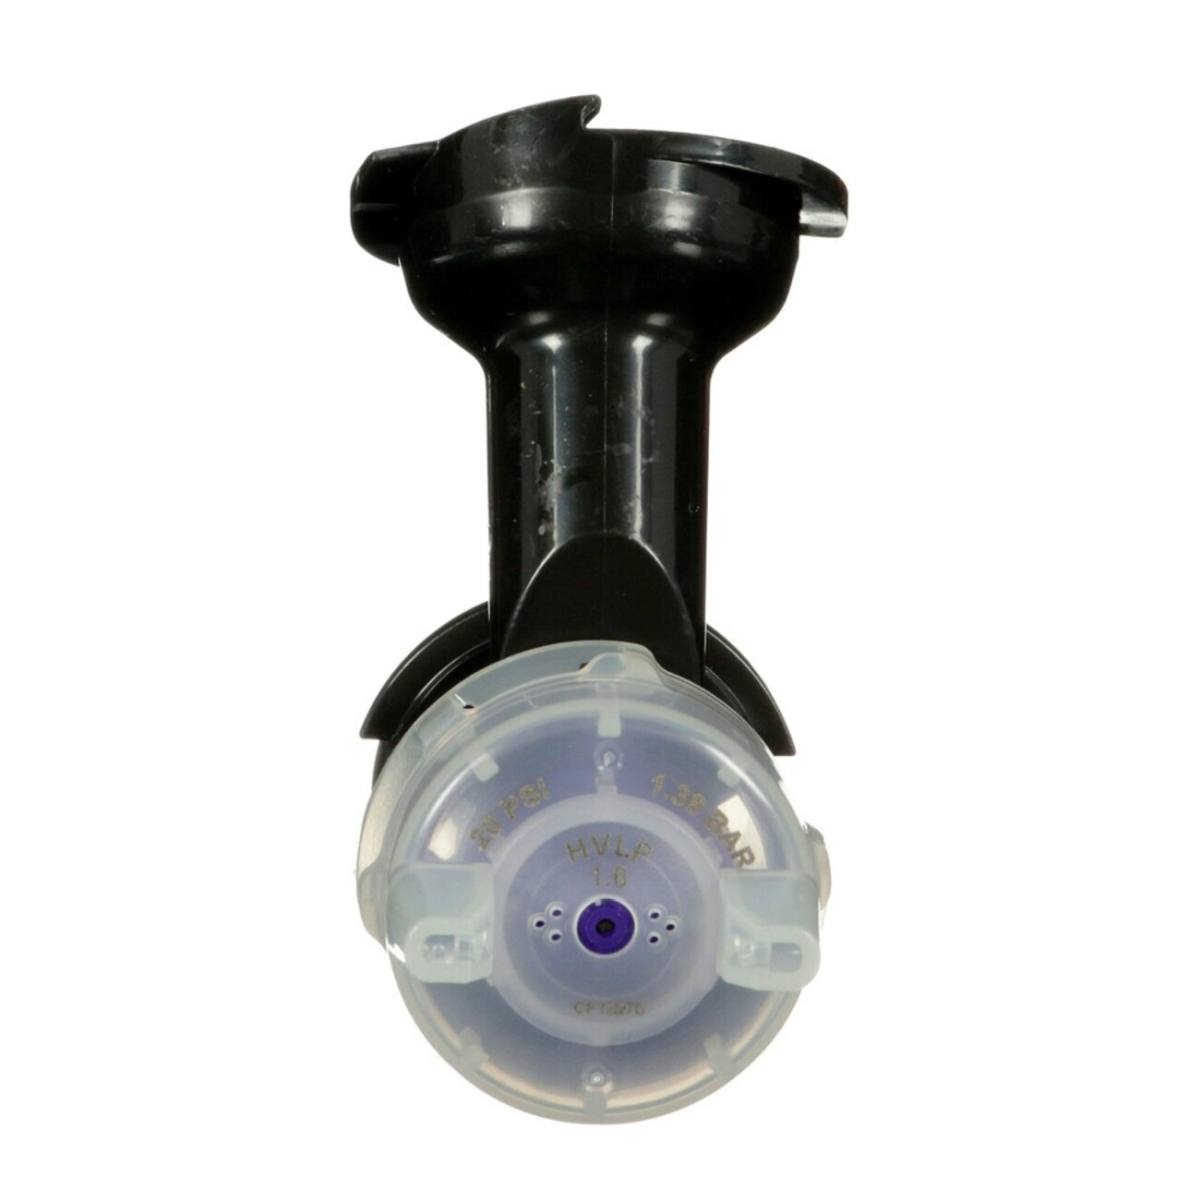 3M High performance nozzle head for flow cup Performance Gravity HVLP Atomizing Head Refill Kit 26716, Purple, 1.6 (Pack=5pcs)